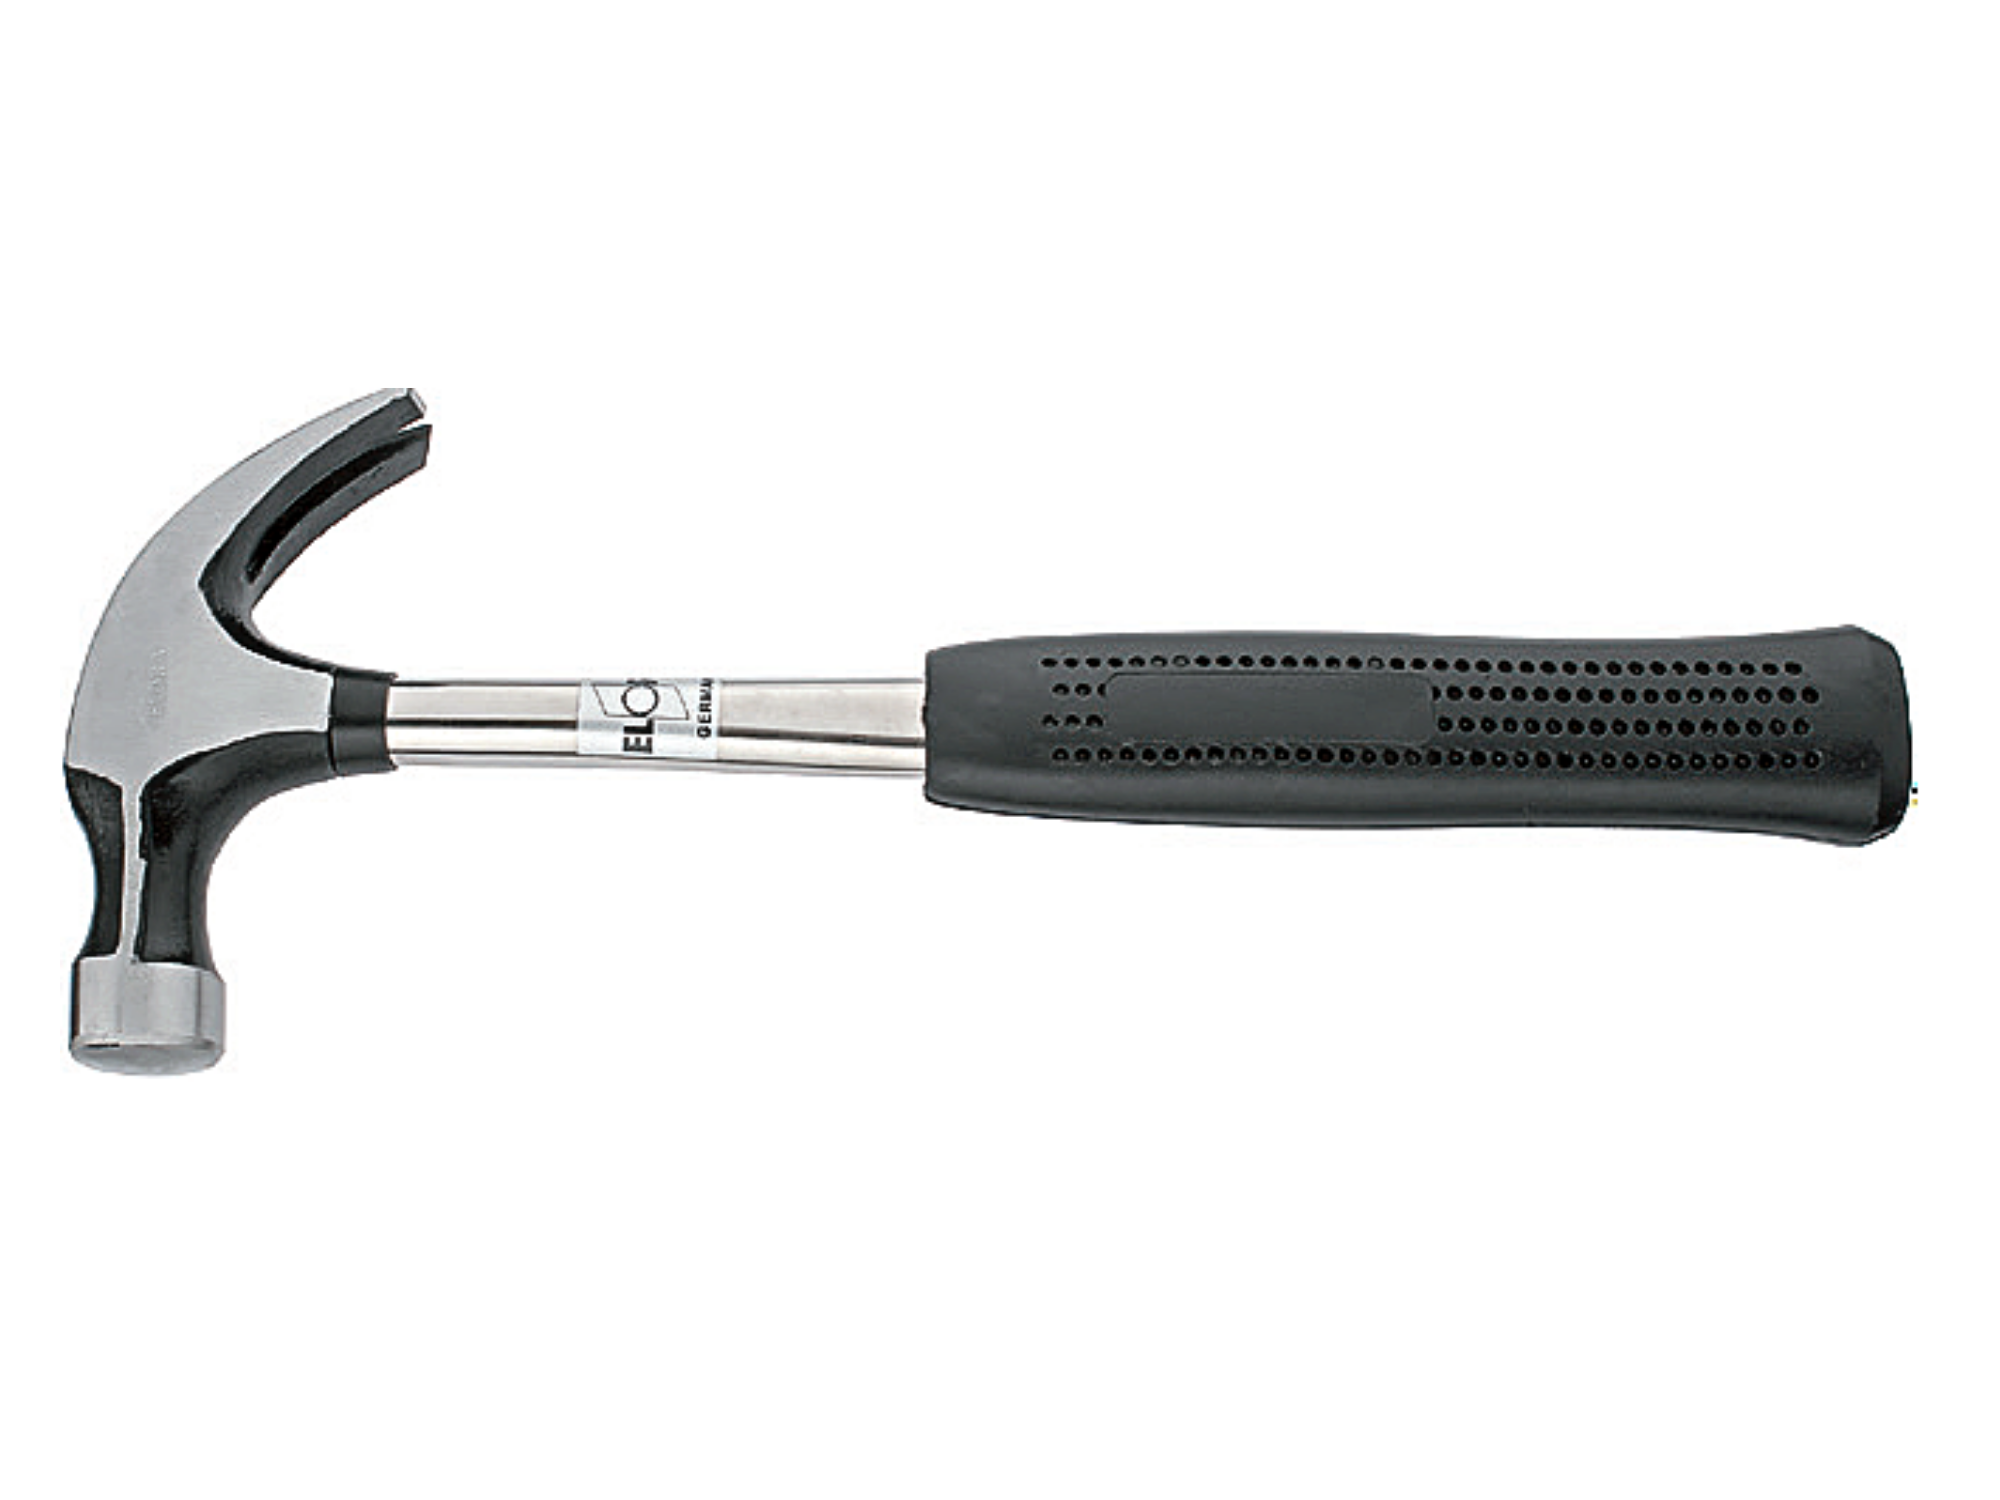 ELORA 1680-330 Claw Hammer (ELORA Tools) - Premium Claw Hammer from ELORA - Shop now at Yew Aik.